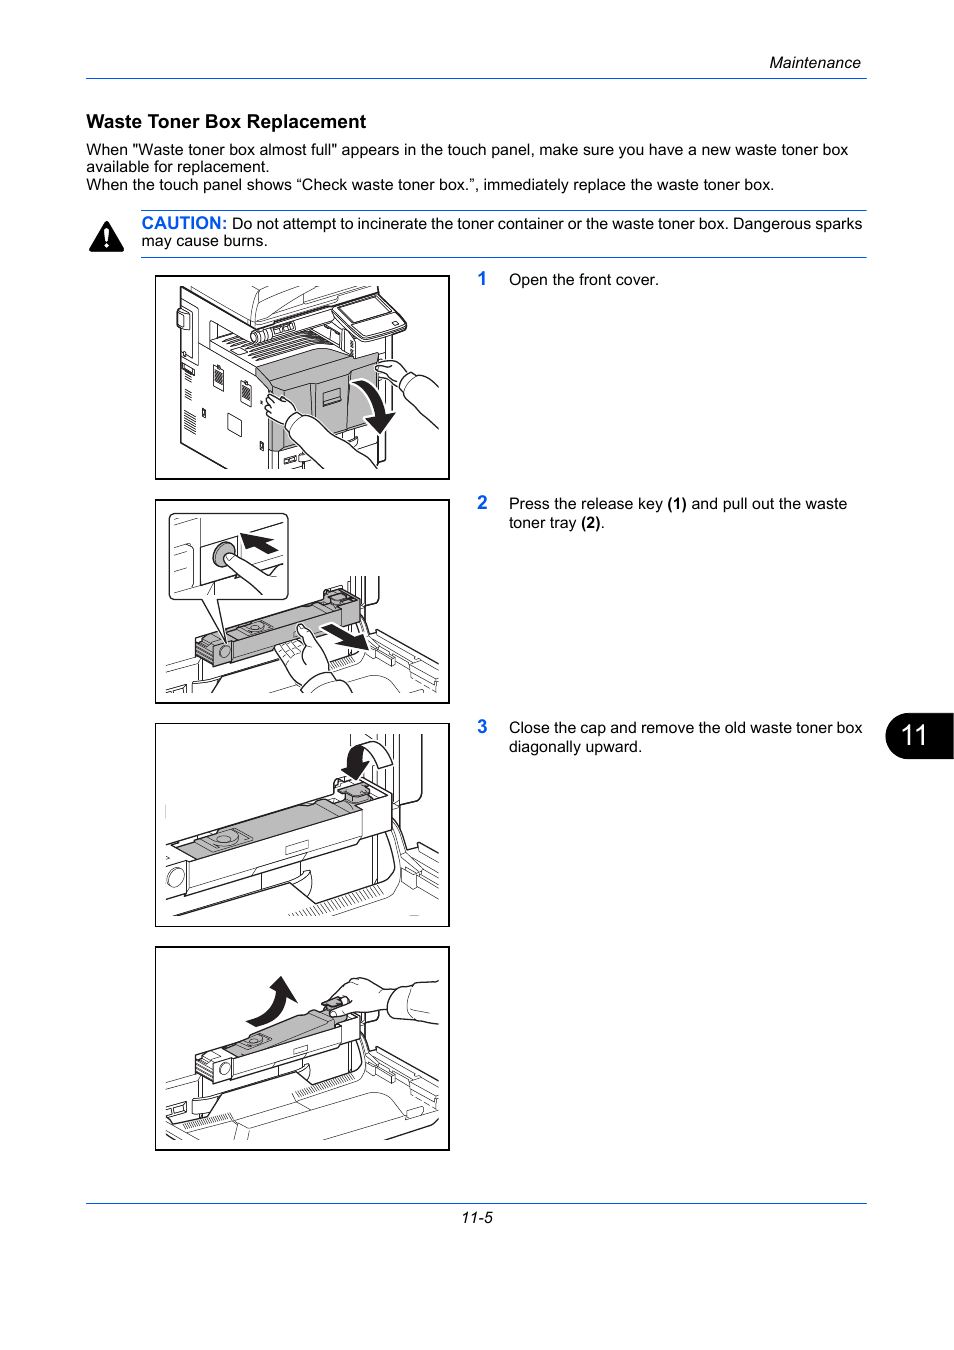 Waste toner box replacement | TA Triumph-Adler DCC 2930 User Manual | Page  461 / 588